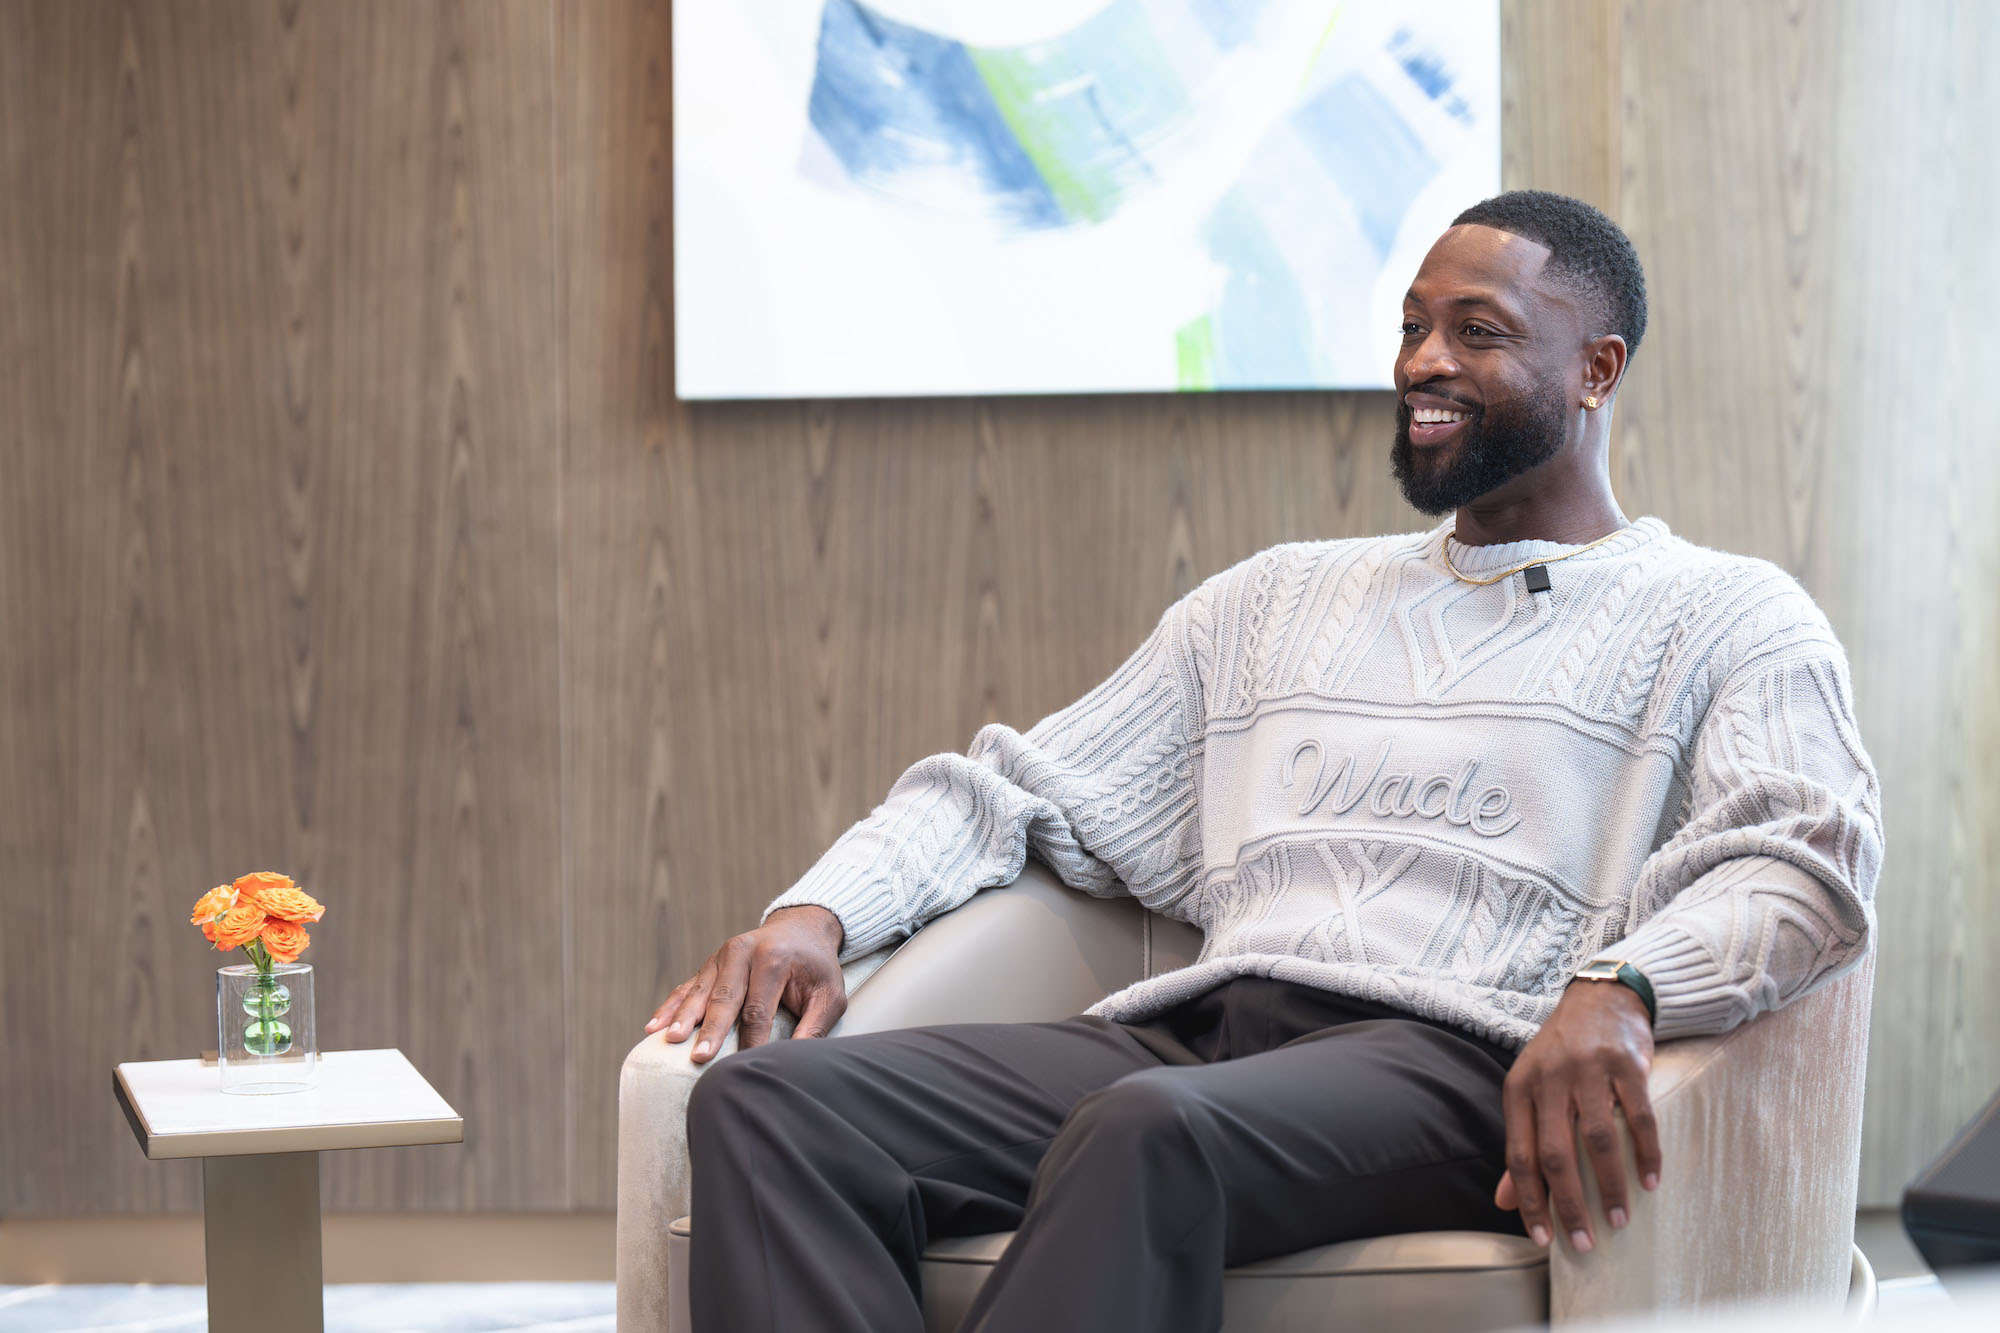 In conversation with NBA champion and Hall of Famer Dwyane Wade